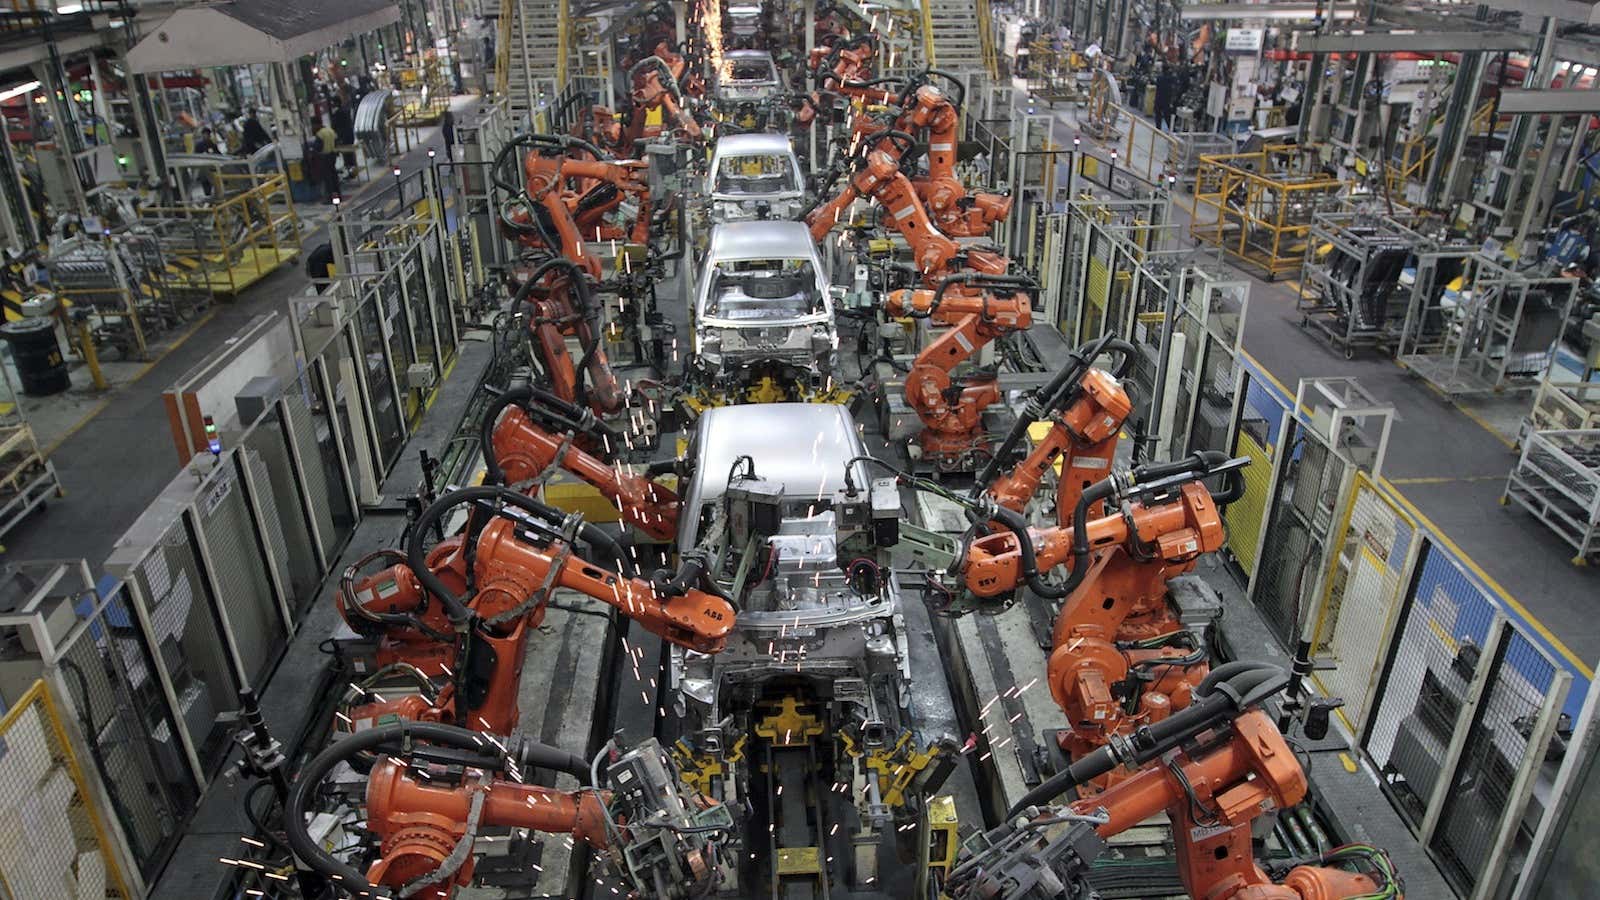 Many workers at automobile factories risk losing their fingers.